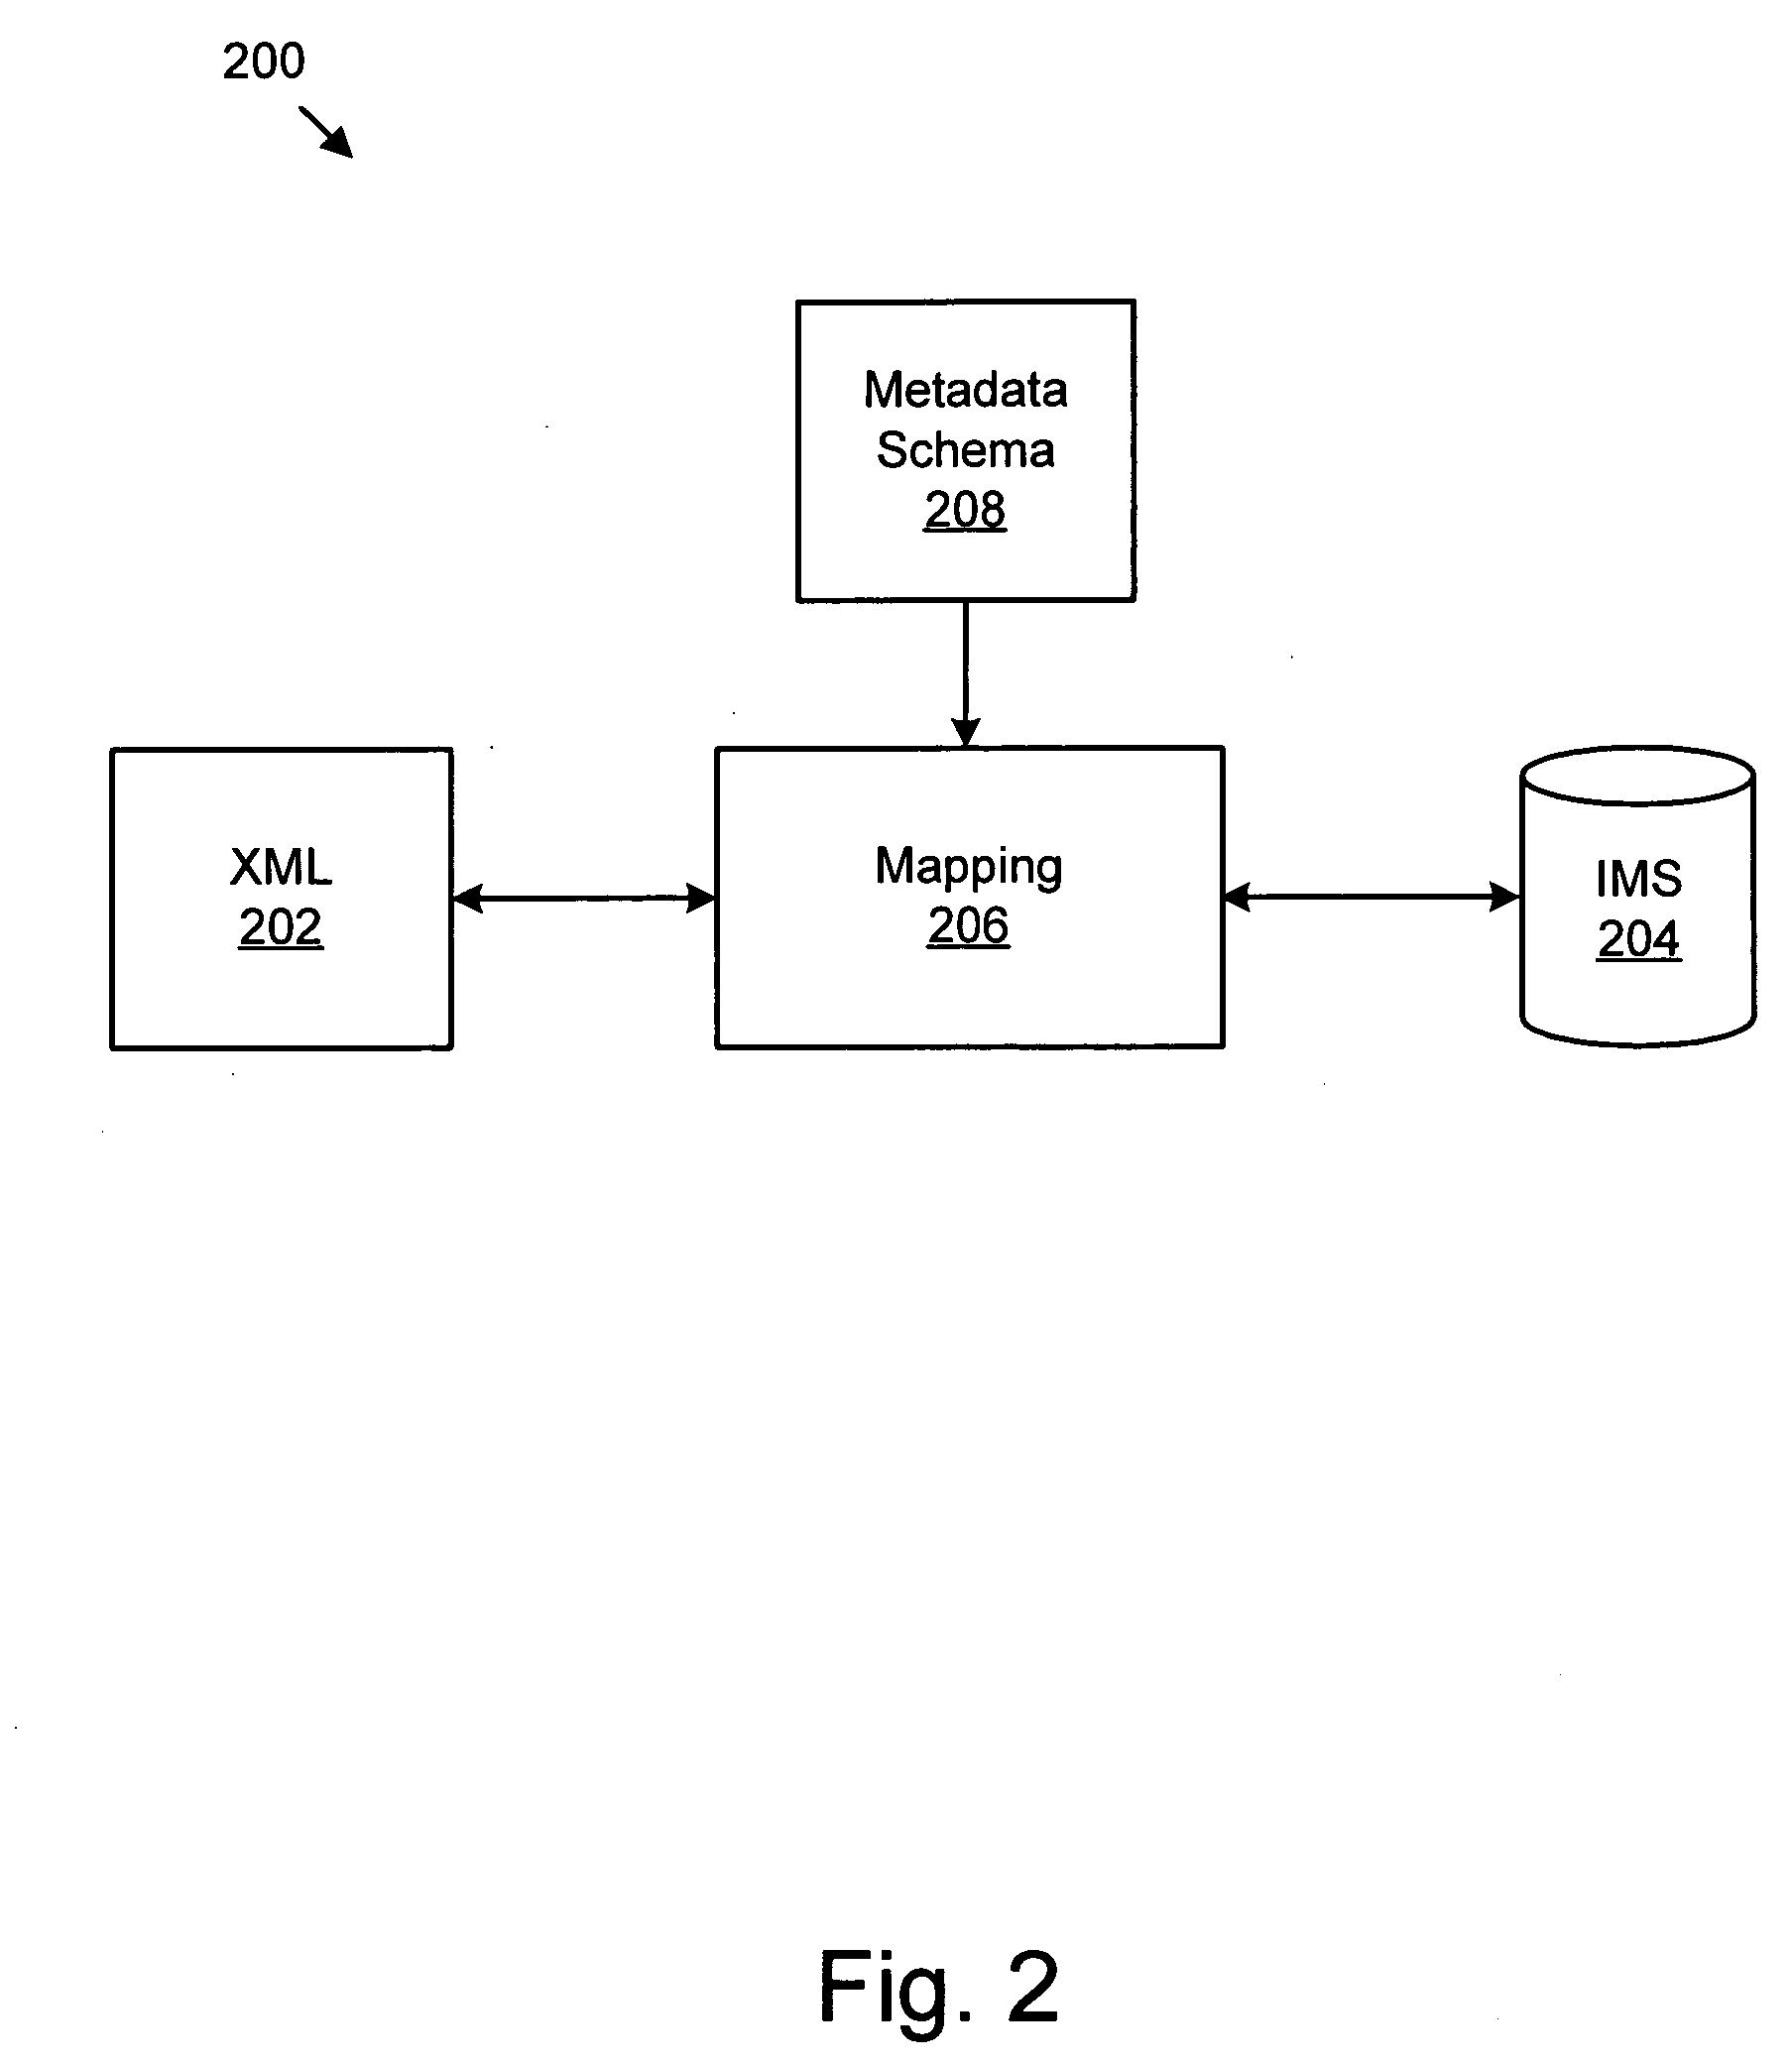 Apparatus, system, and method for passing data between an extensible markup language document and a hierarchical database